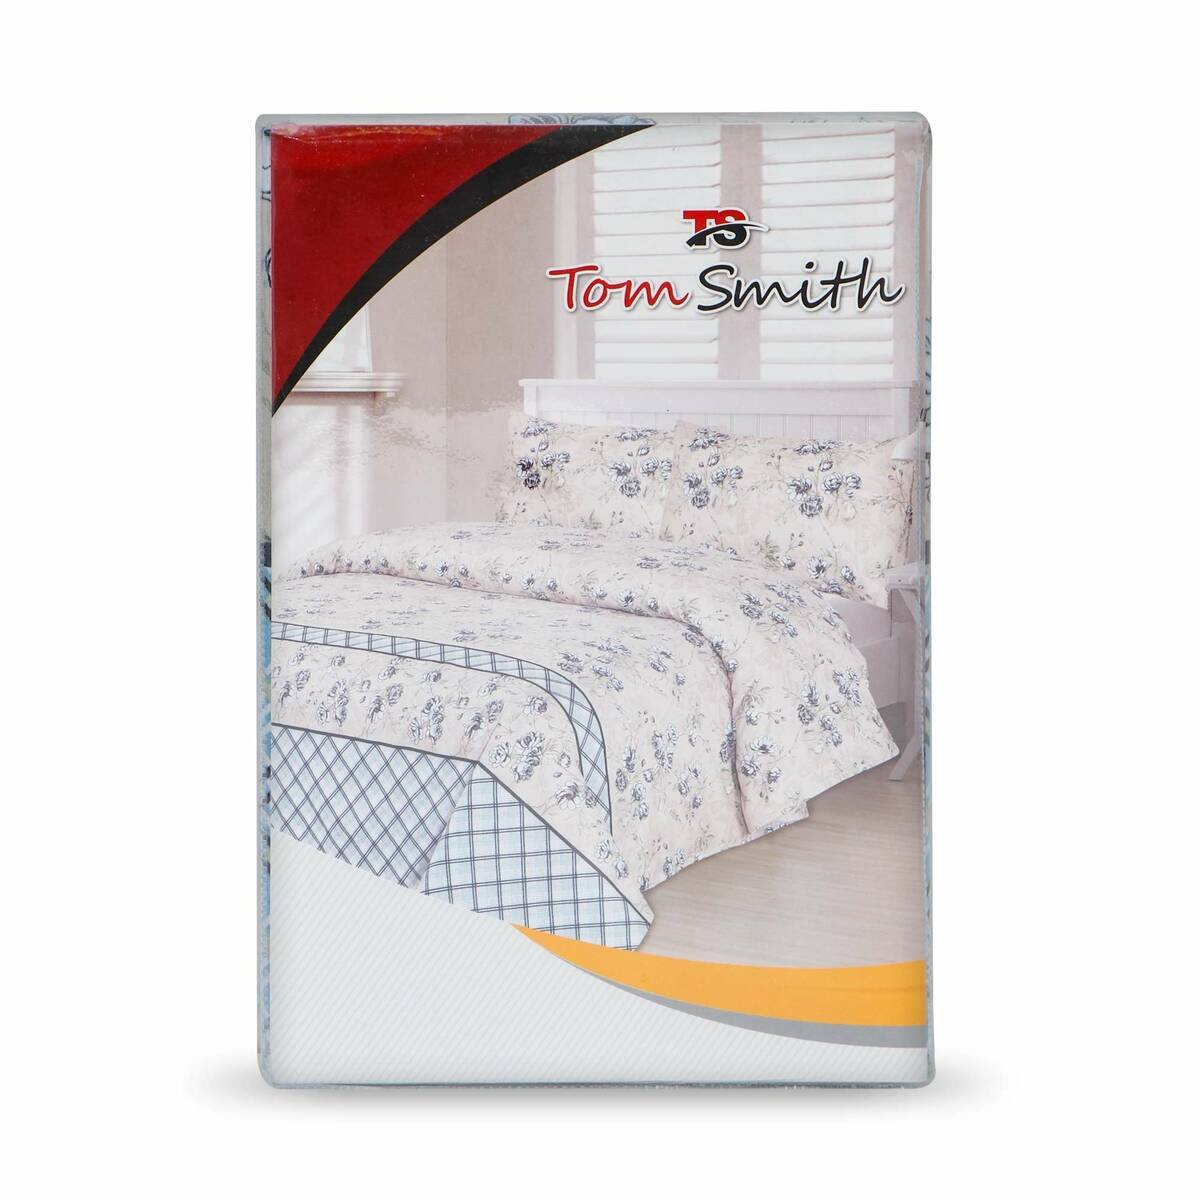 Tom Smith Bed Sheet Size: 150x240cm + Pillow Cover Flowers Cream